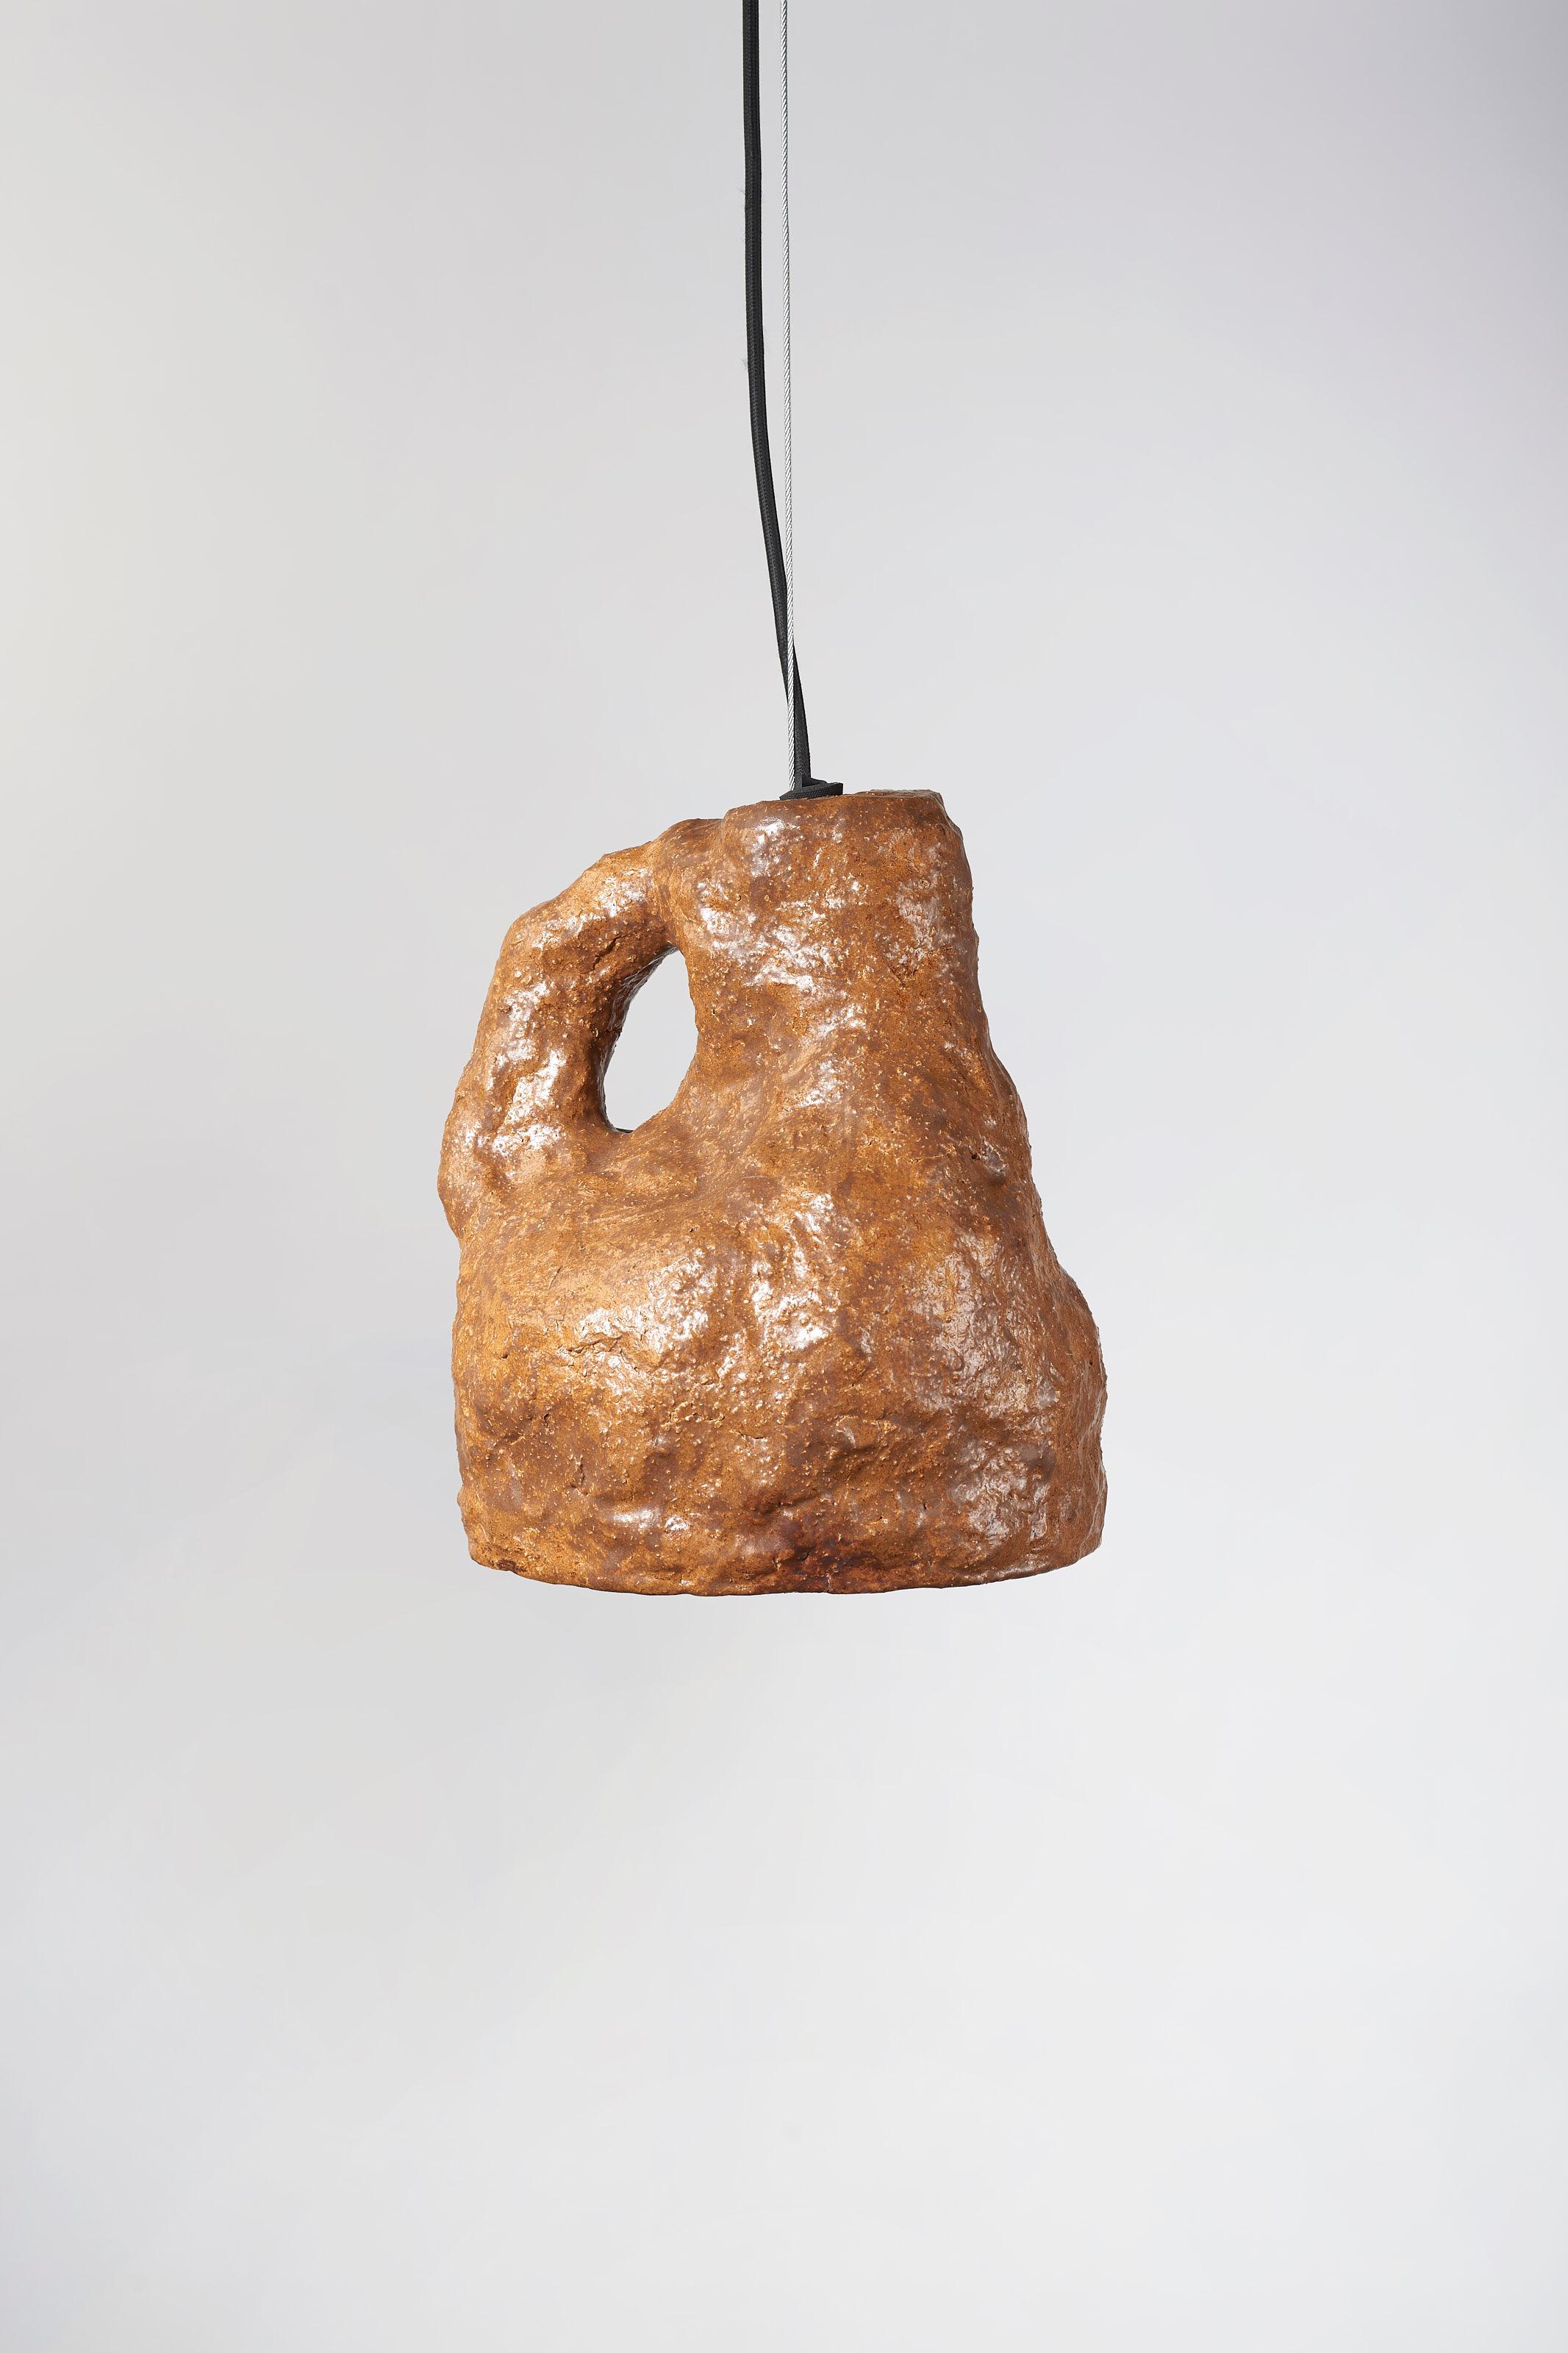 Dual lamp brown medium by Willem Van Hooff
Dimensions: W 25 x H 30 cm (Dimensions may vary as pieces are hand-made and might present slight variations in sizes)
Materials: Earthenware, ceramic, pigments and glaze
Also available in different colours: